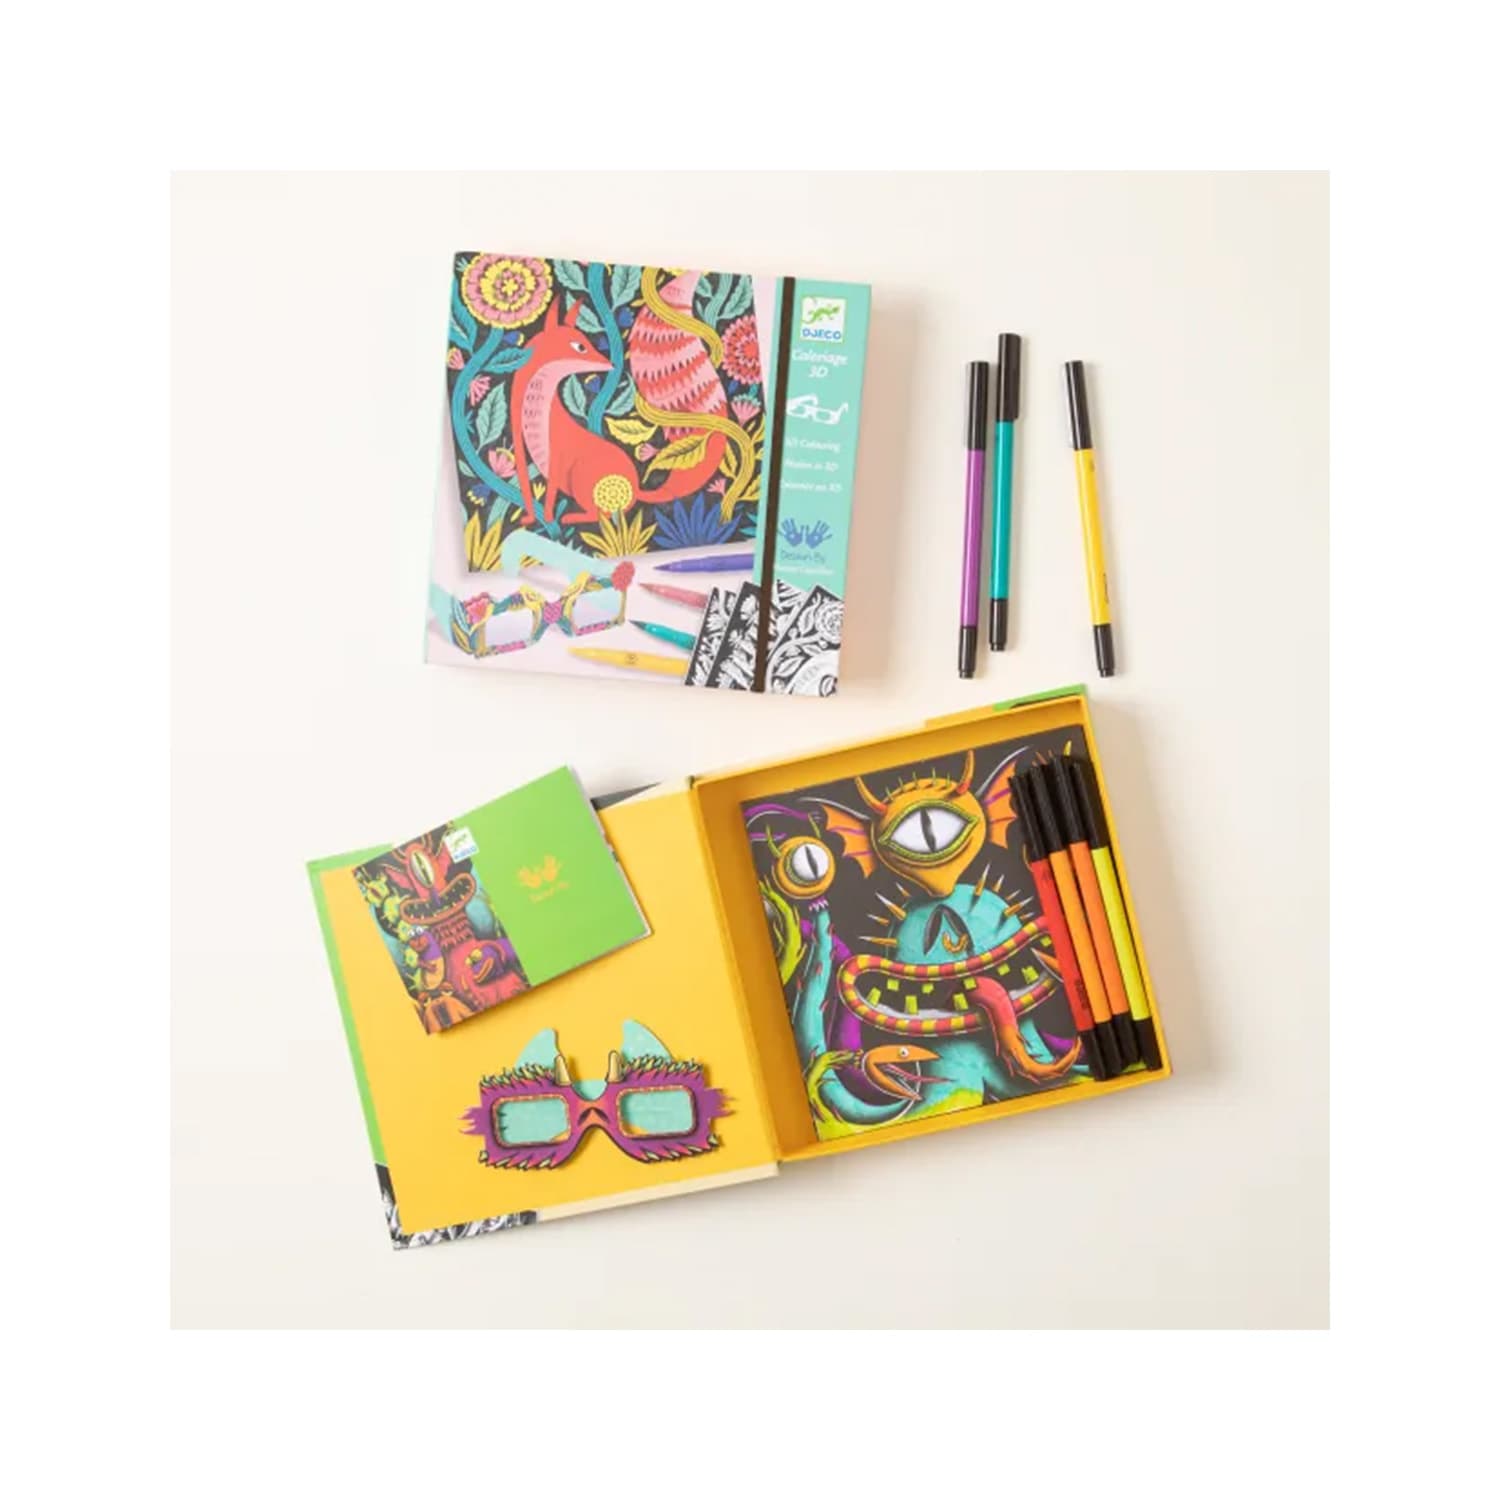 Drawing Supplies For Kids: Inspire Young Artists - Fundemonium